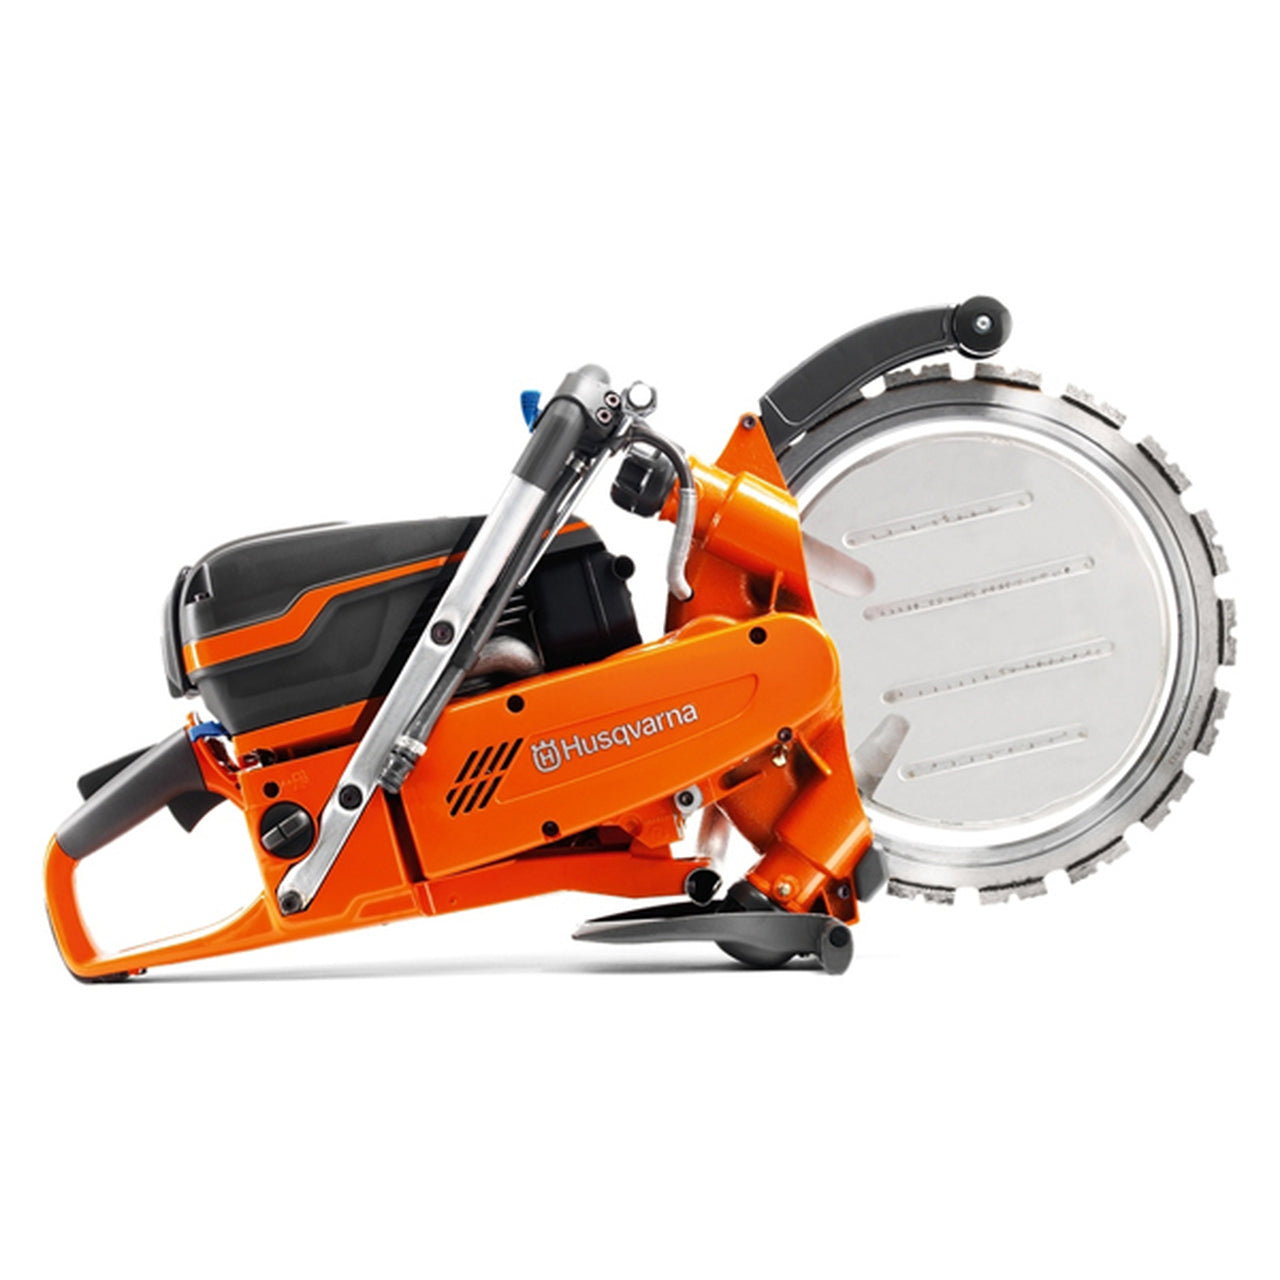 Husqvarna 967272301  -  Gas Powered 14" Ring Saw - Blade not included